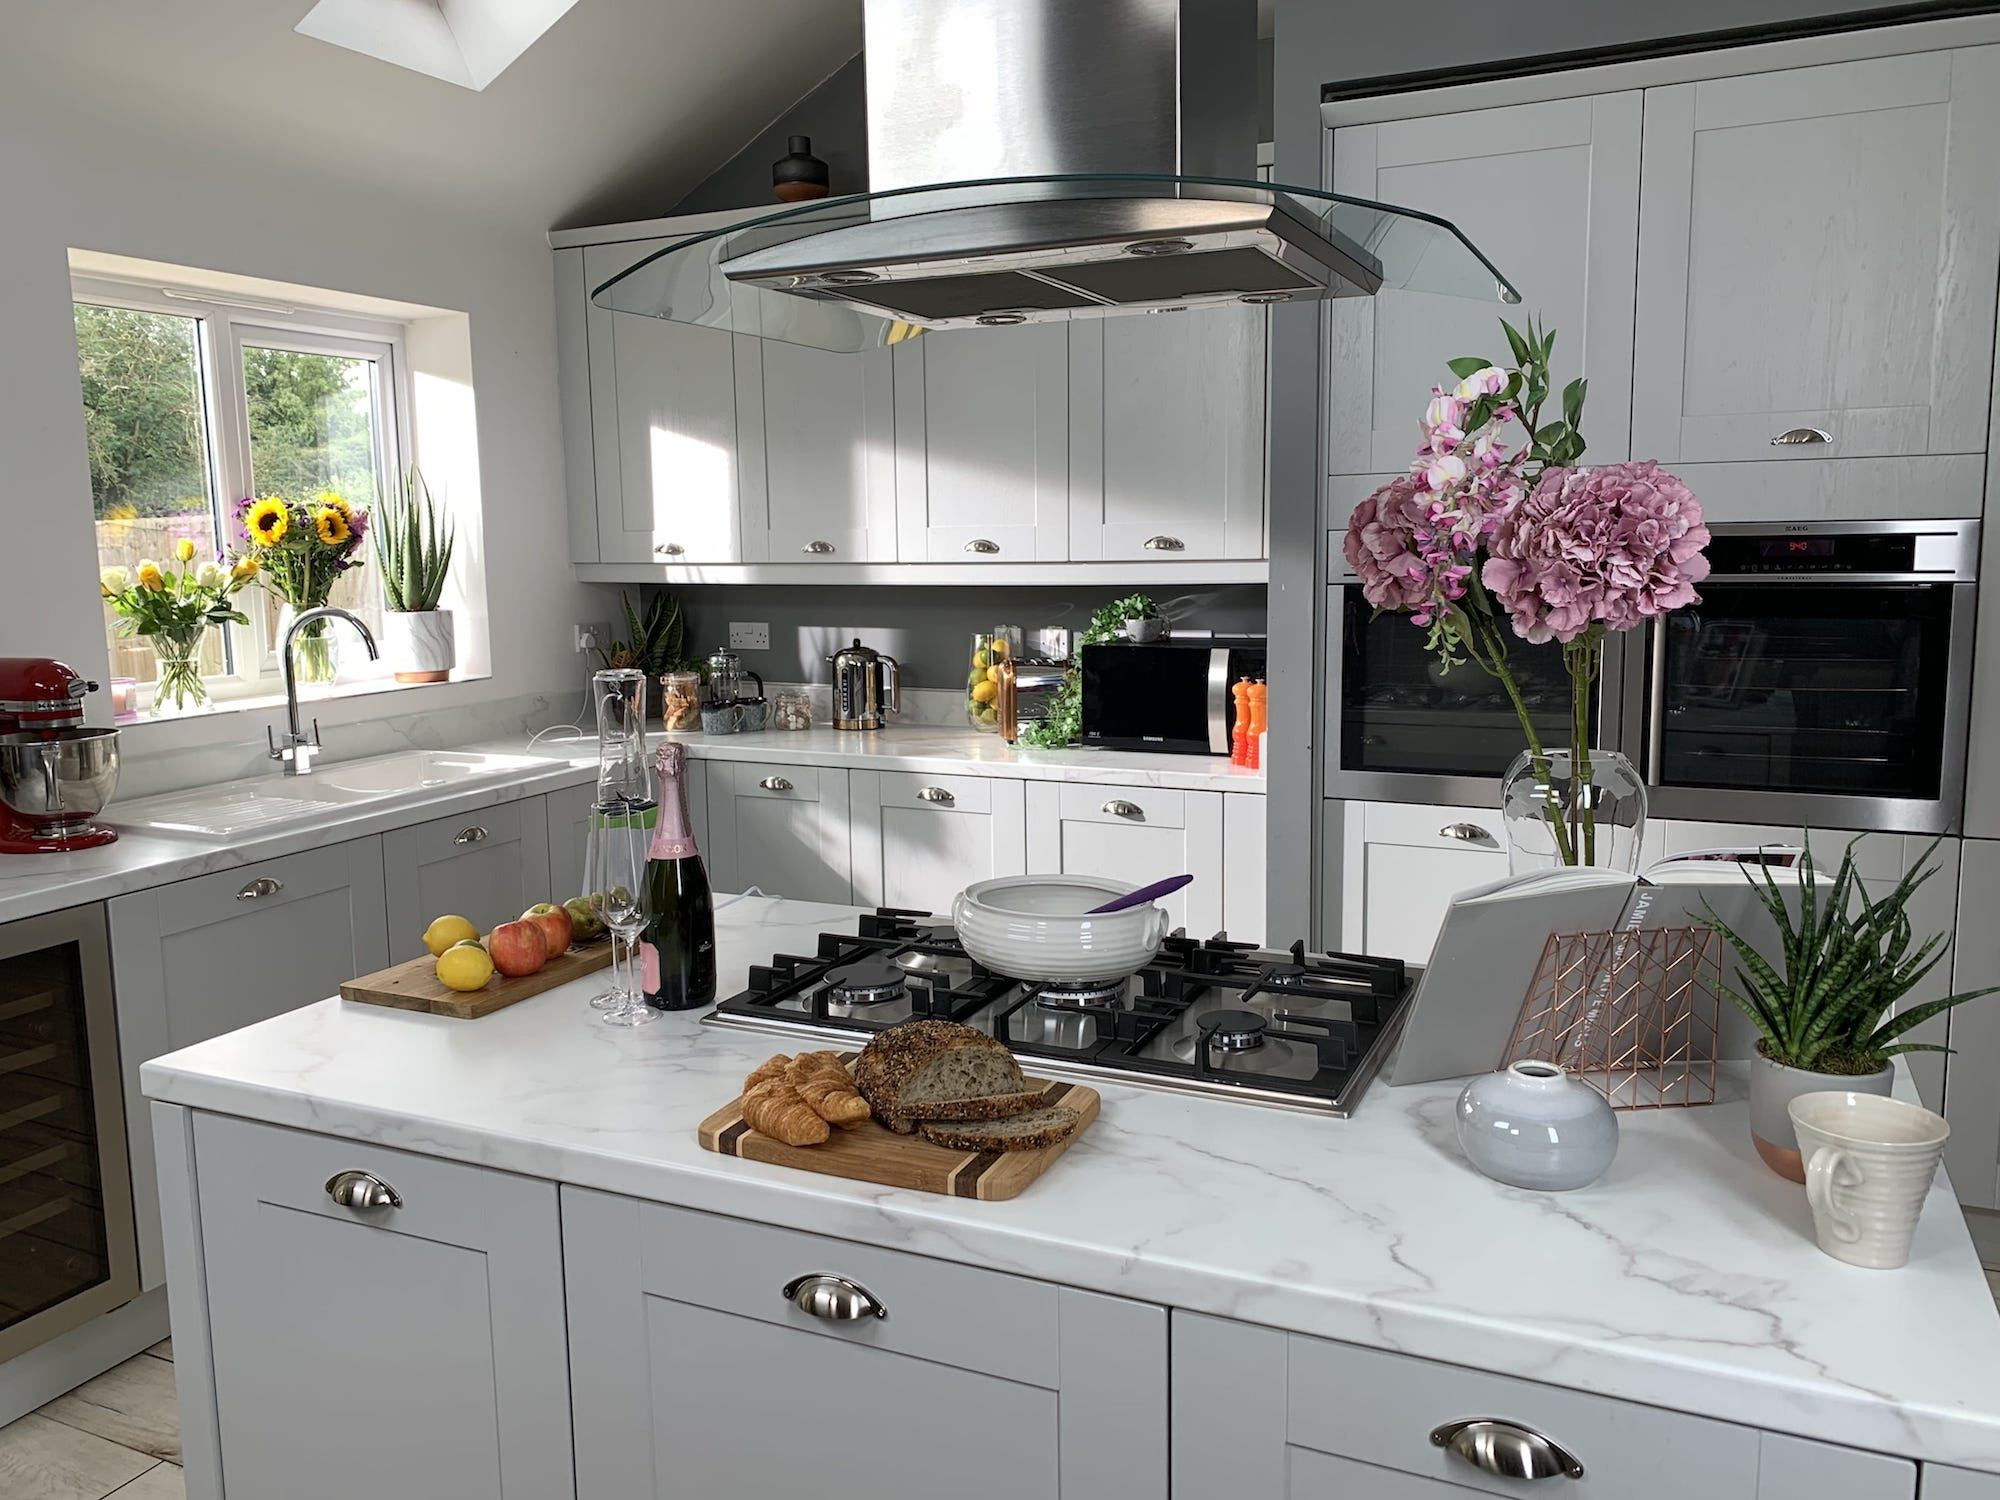 As a Kitchen Door Manufacturer, we offer the Full Service of Kitchen Renovation